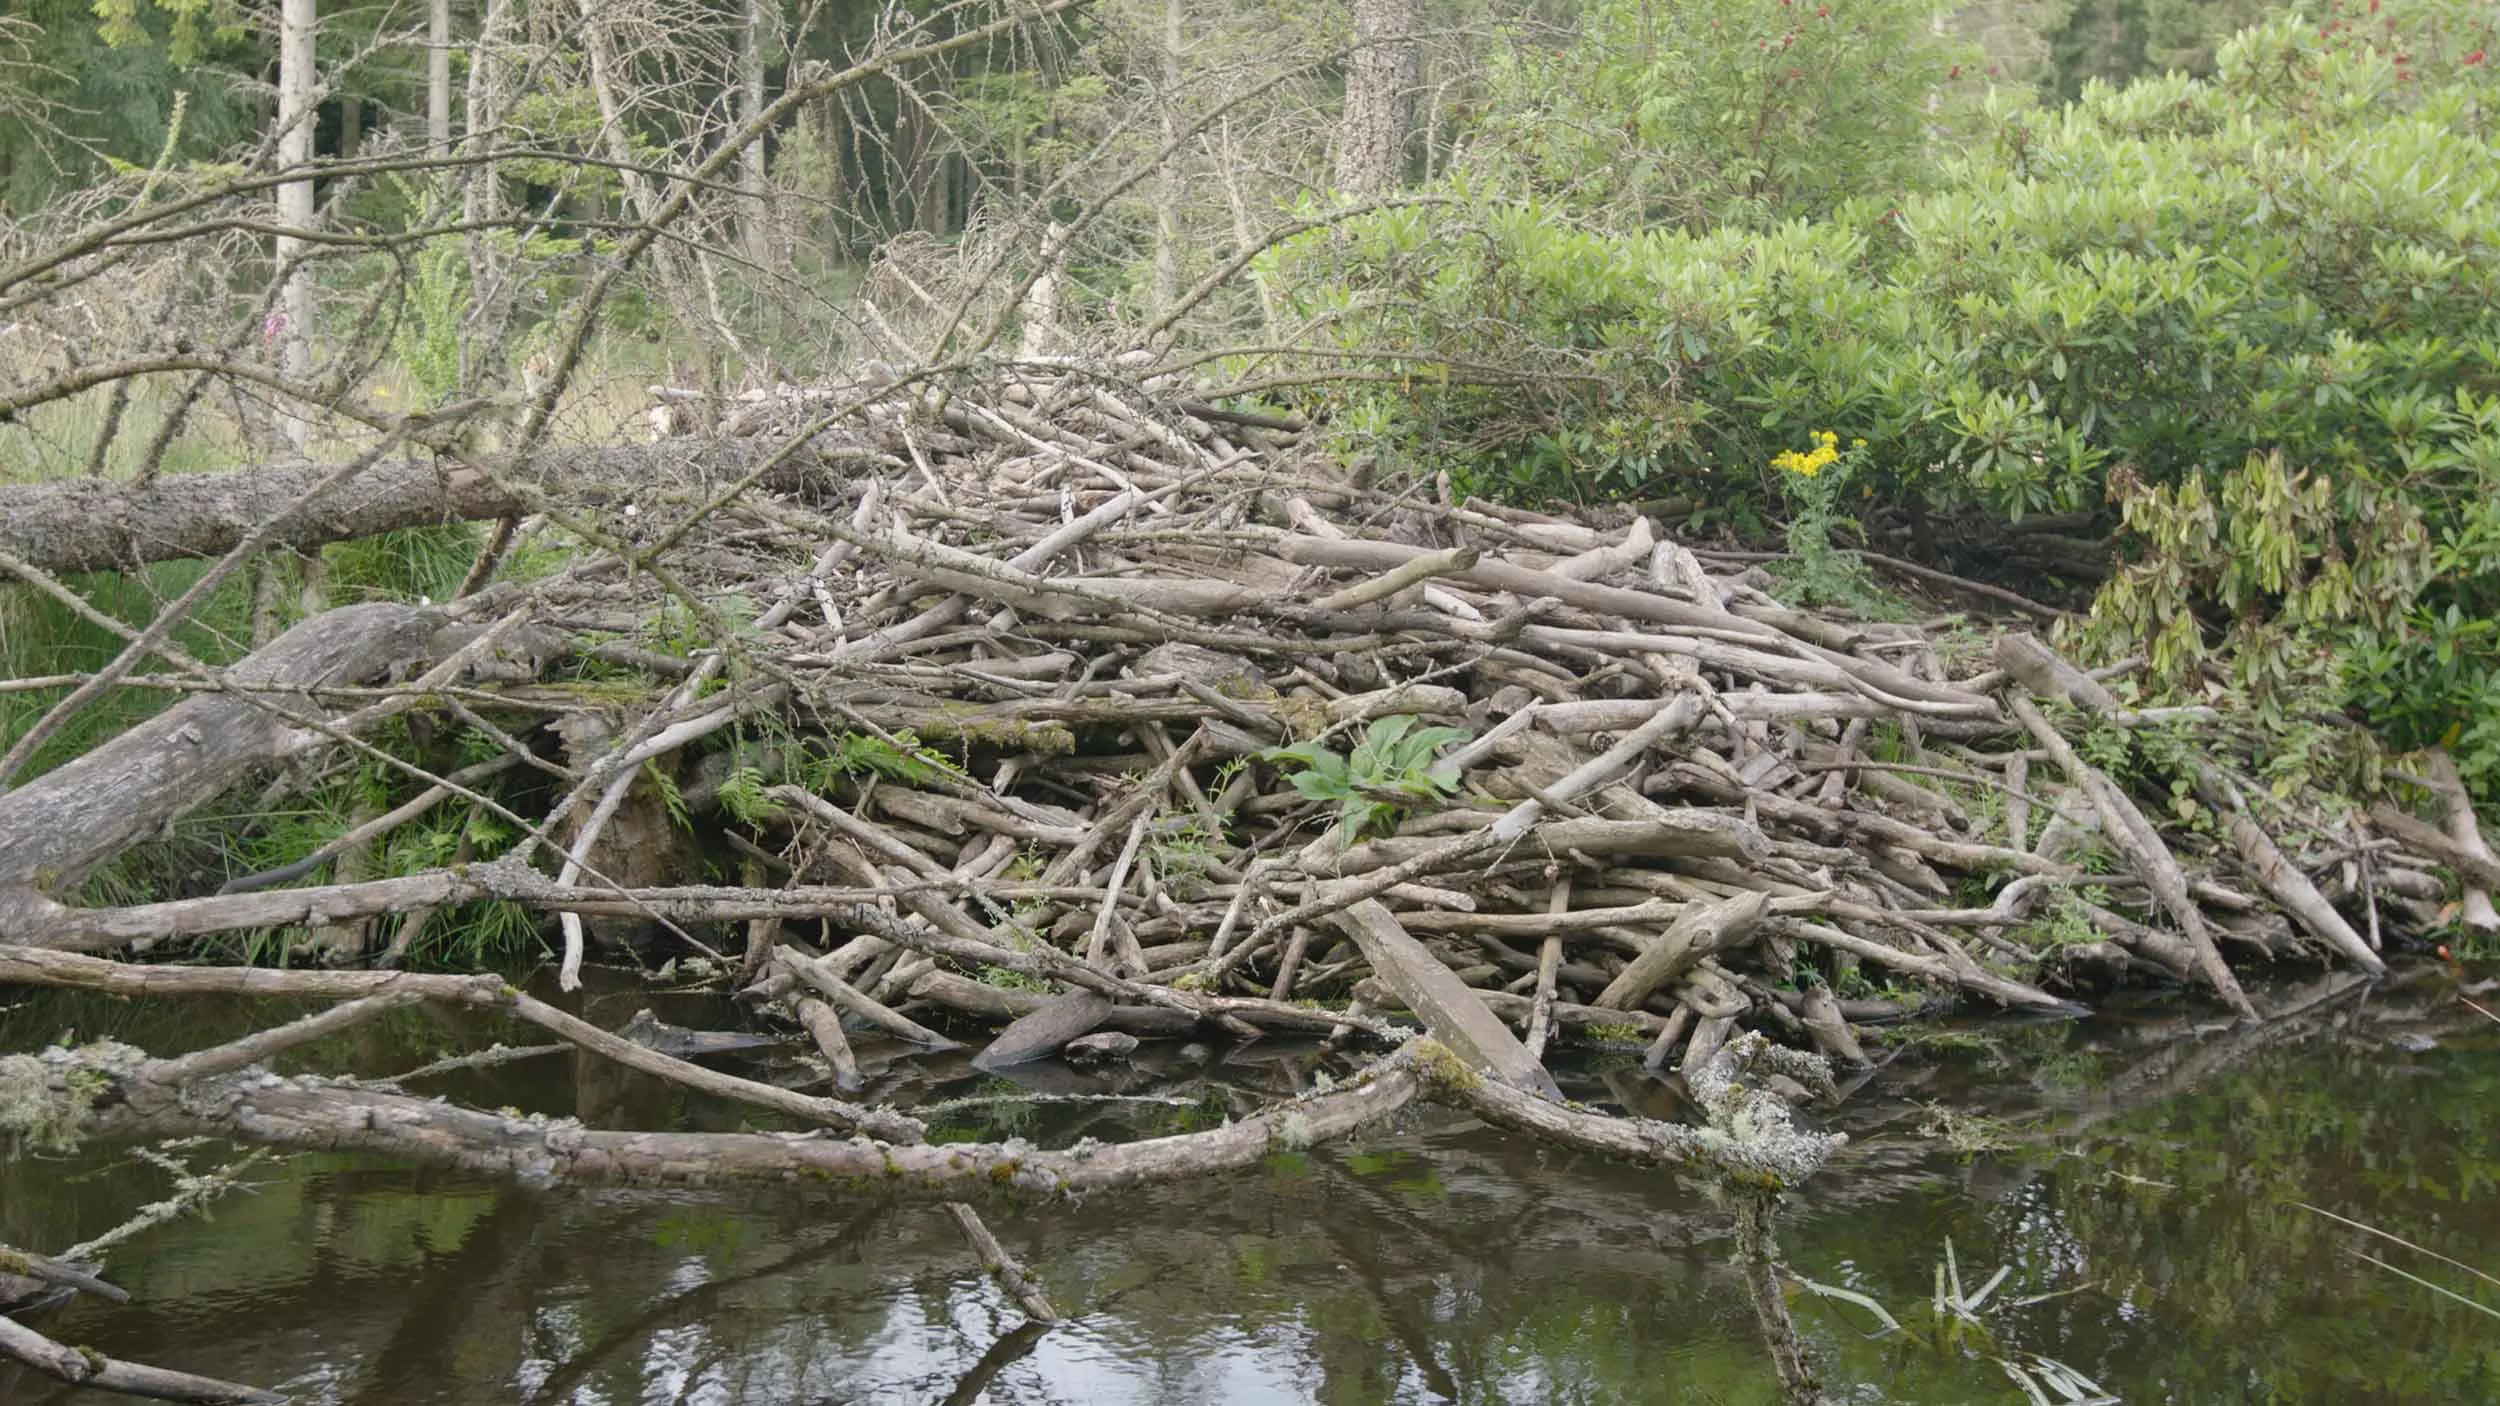 A river, partially blocked by a pile of intertwined logs and branches.